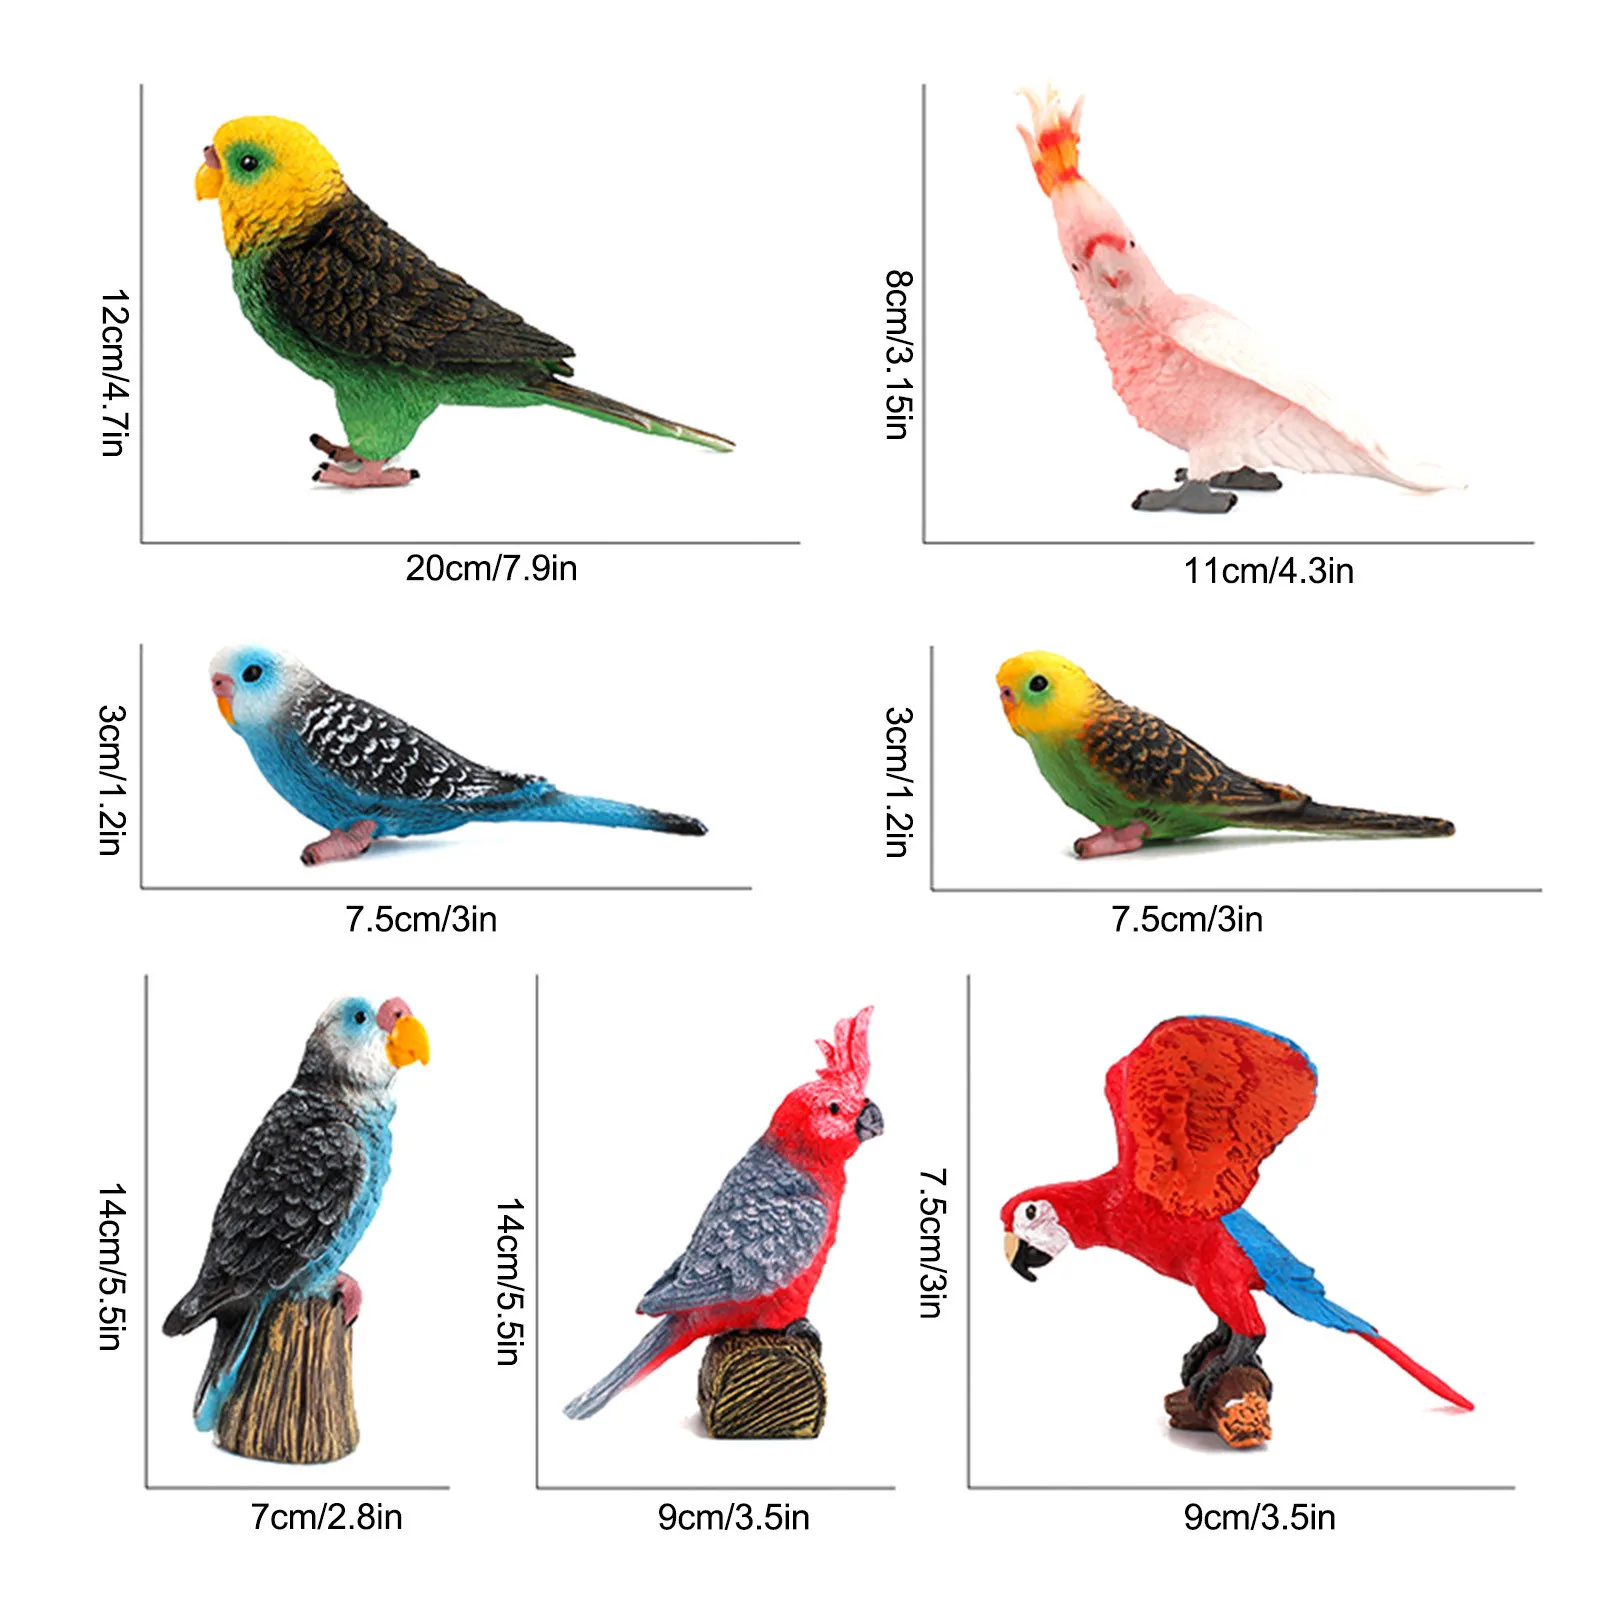 

2021 NEW Bird Parrot Animal Toys Figurines Home Decorate Preschool Educational Figures Miniature Education Toy Action Model#4